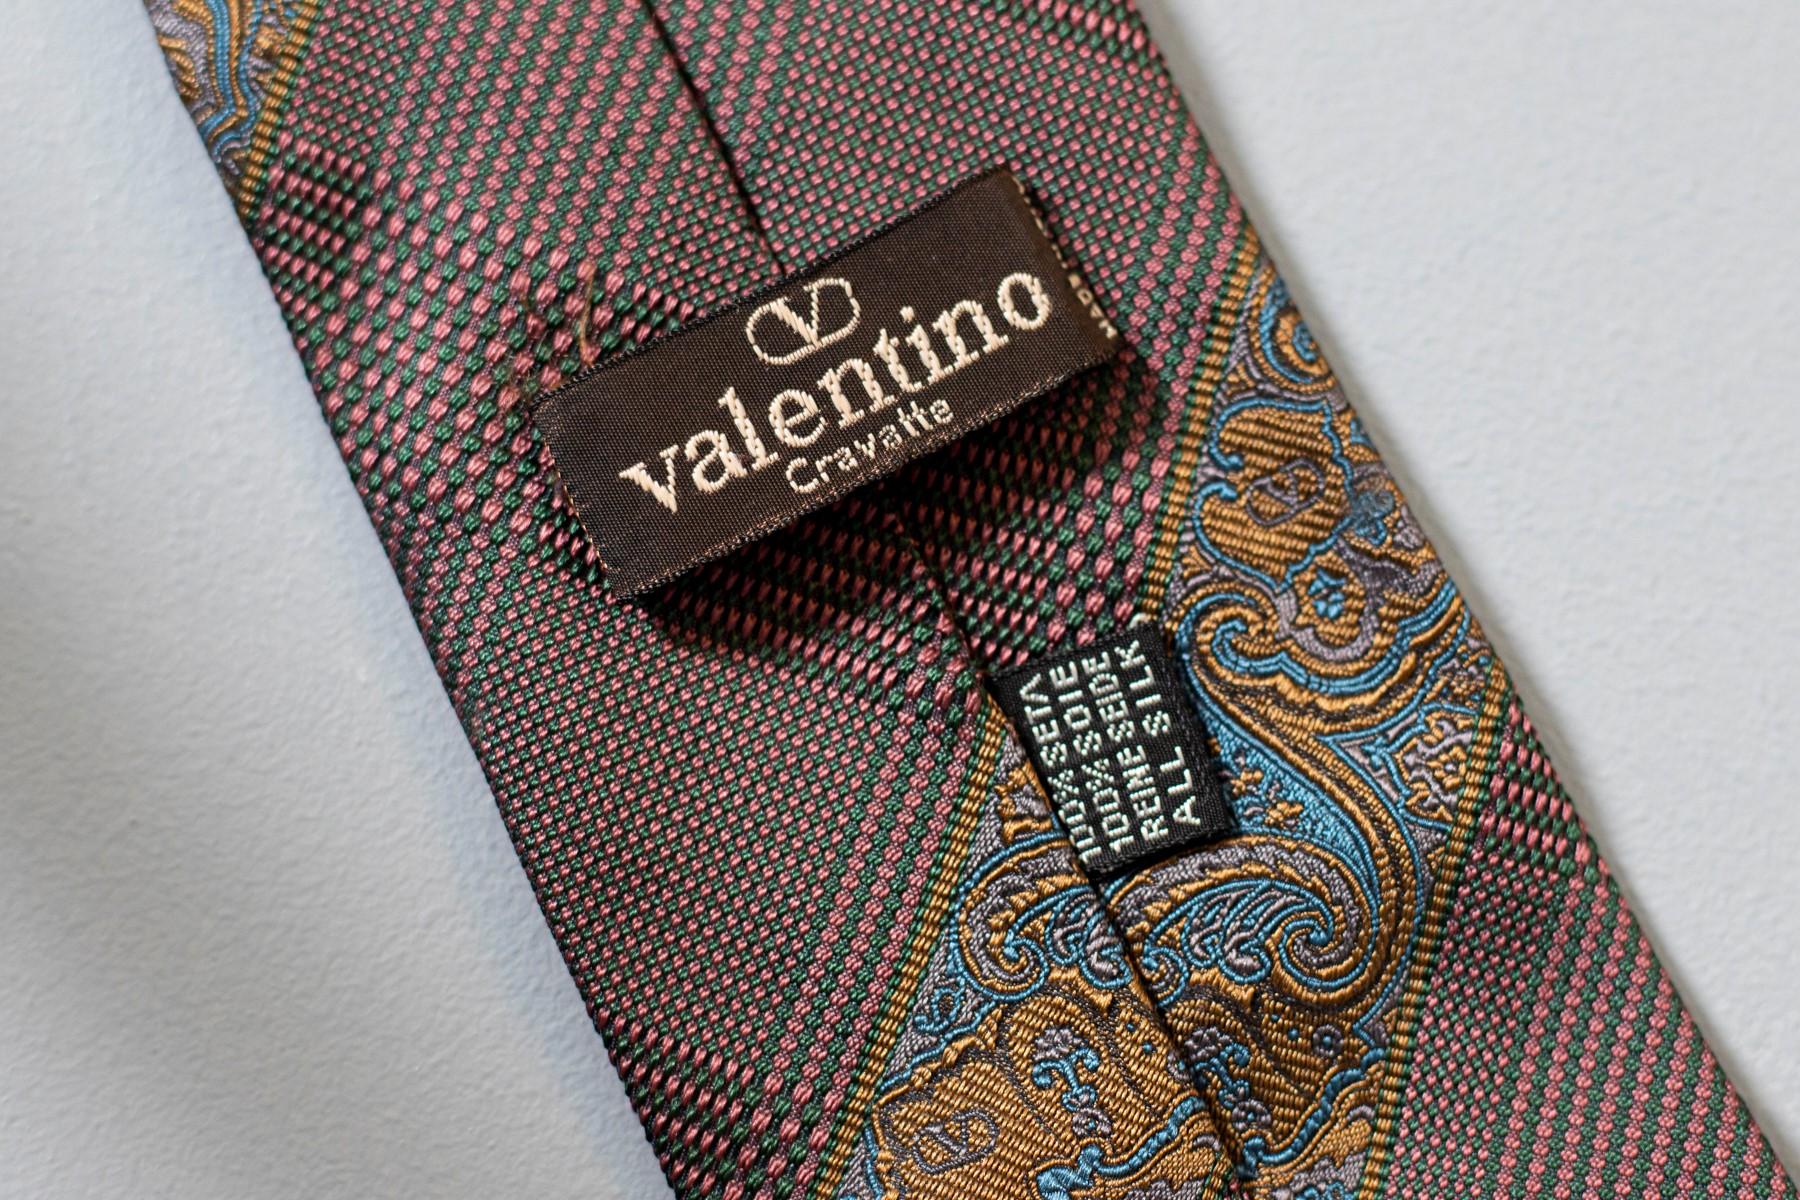 Made in Italy and designed by the great Valentino, this vintage tie is classic and elegant. Decorated with golden and blue motifs on a warm brownish background, this tie is ideal for a formal night out and it goes perfectly with white or fair